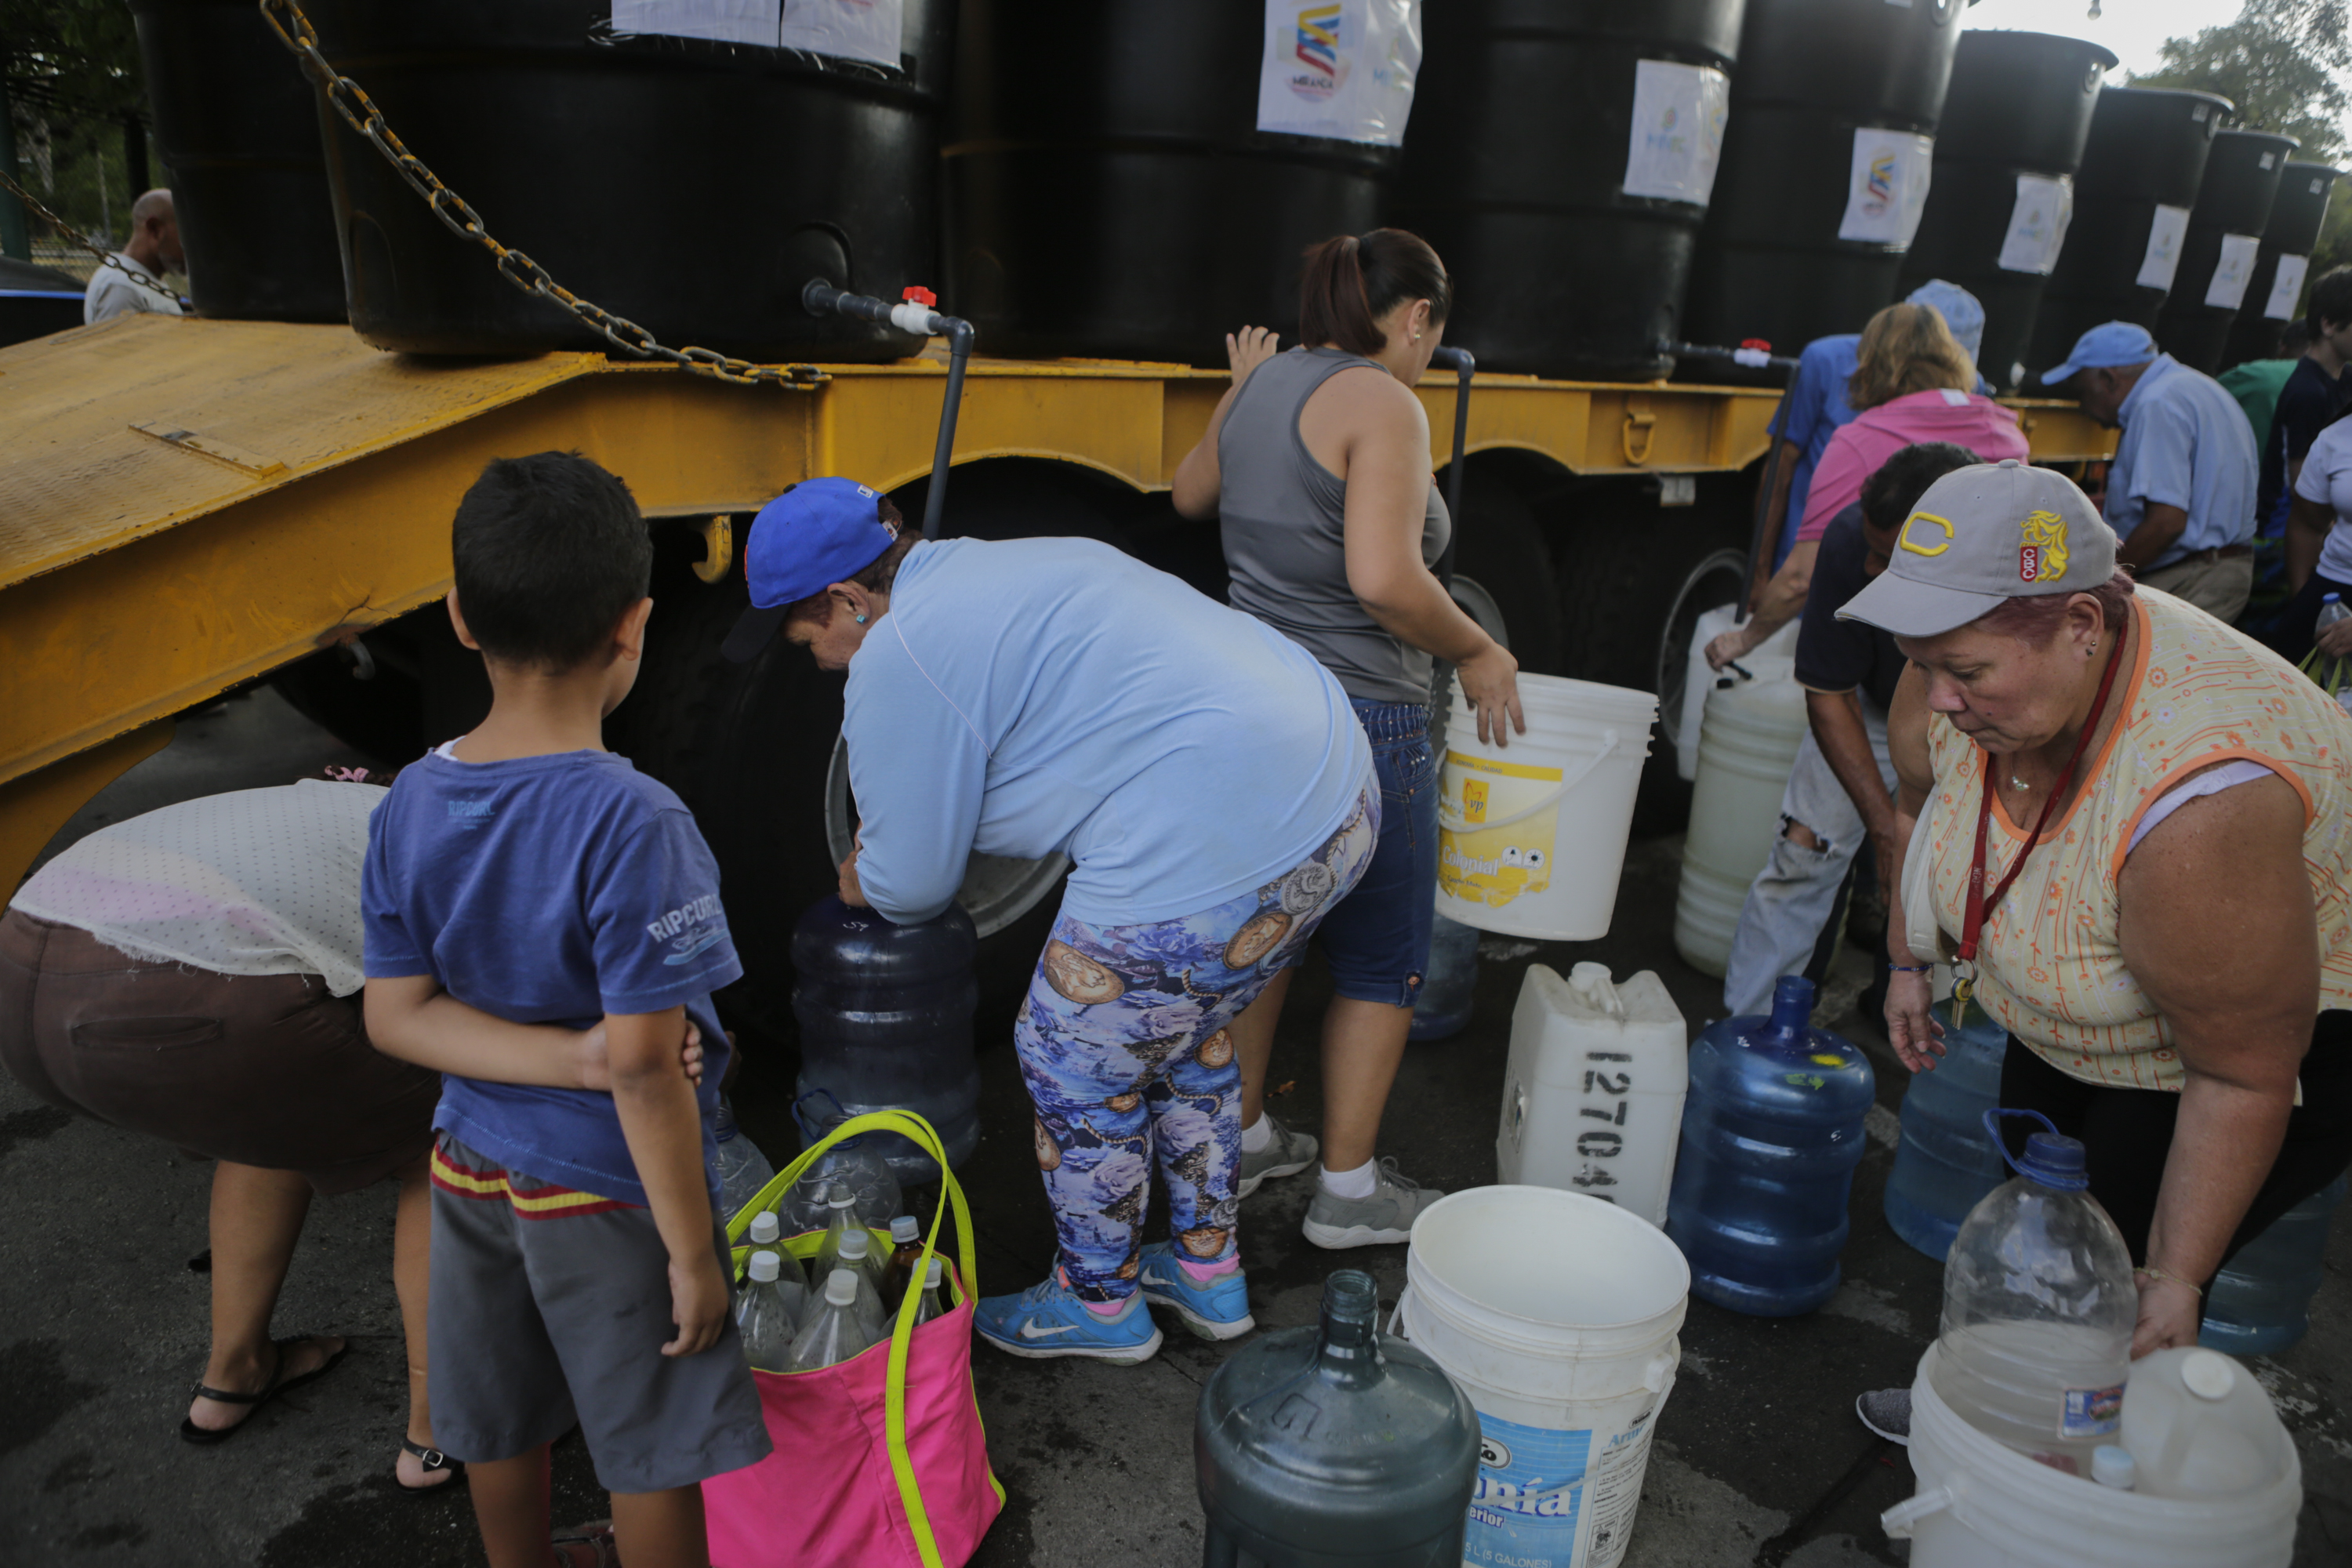 People fill containers with water from tanks in a service area organized to help the community by the Ministry of Popular Power for Ecosocialism and Waters in Parque del Este, on April 4, 2019 in Caracas, Venezuela. (Photo by Eva Marie Uzcategui / Getty Images)